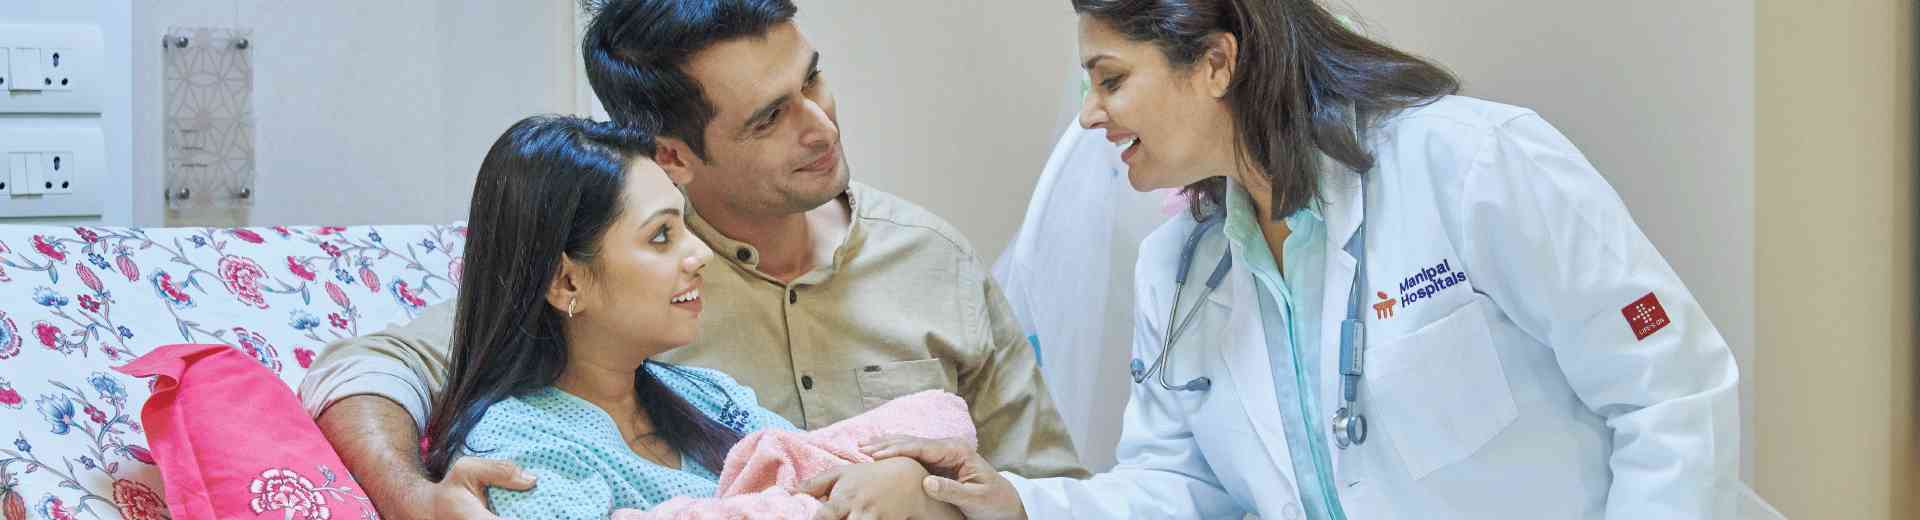 Endoscopy during pregnancy when necessary in Gurgaon